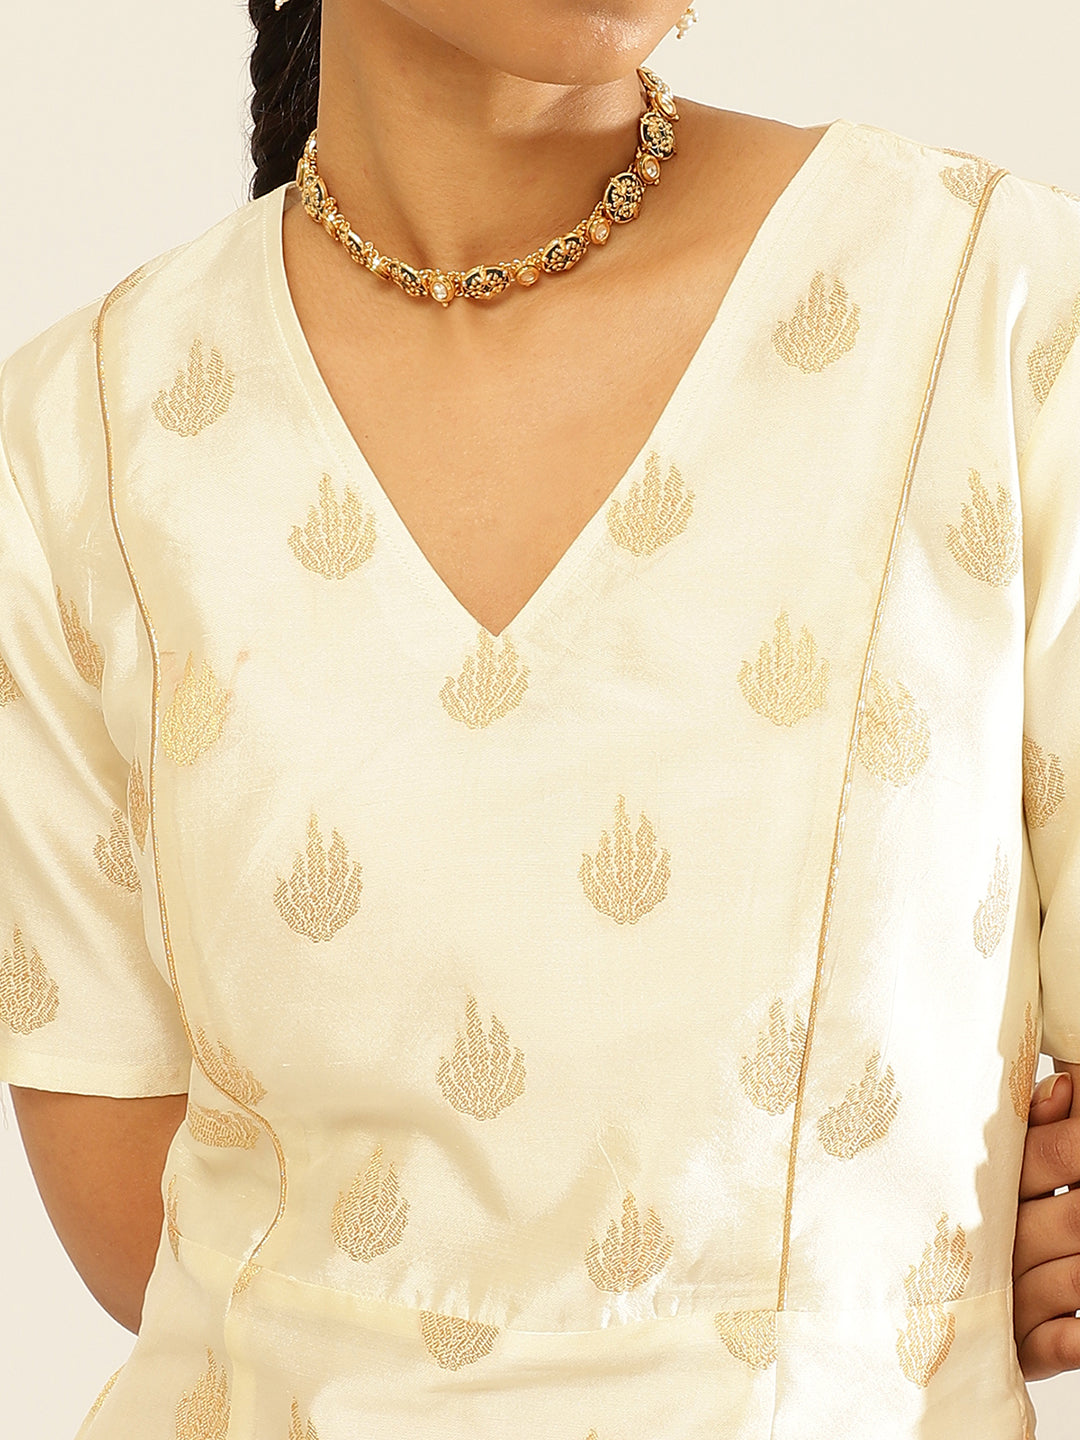 Zari tafetta Kurta with contrasting details paired with pathani pants